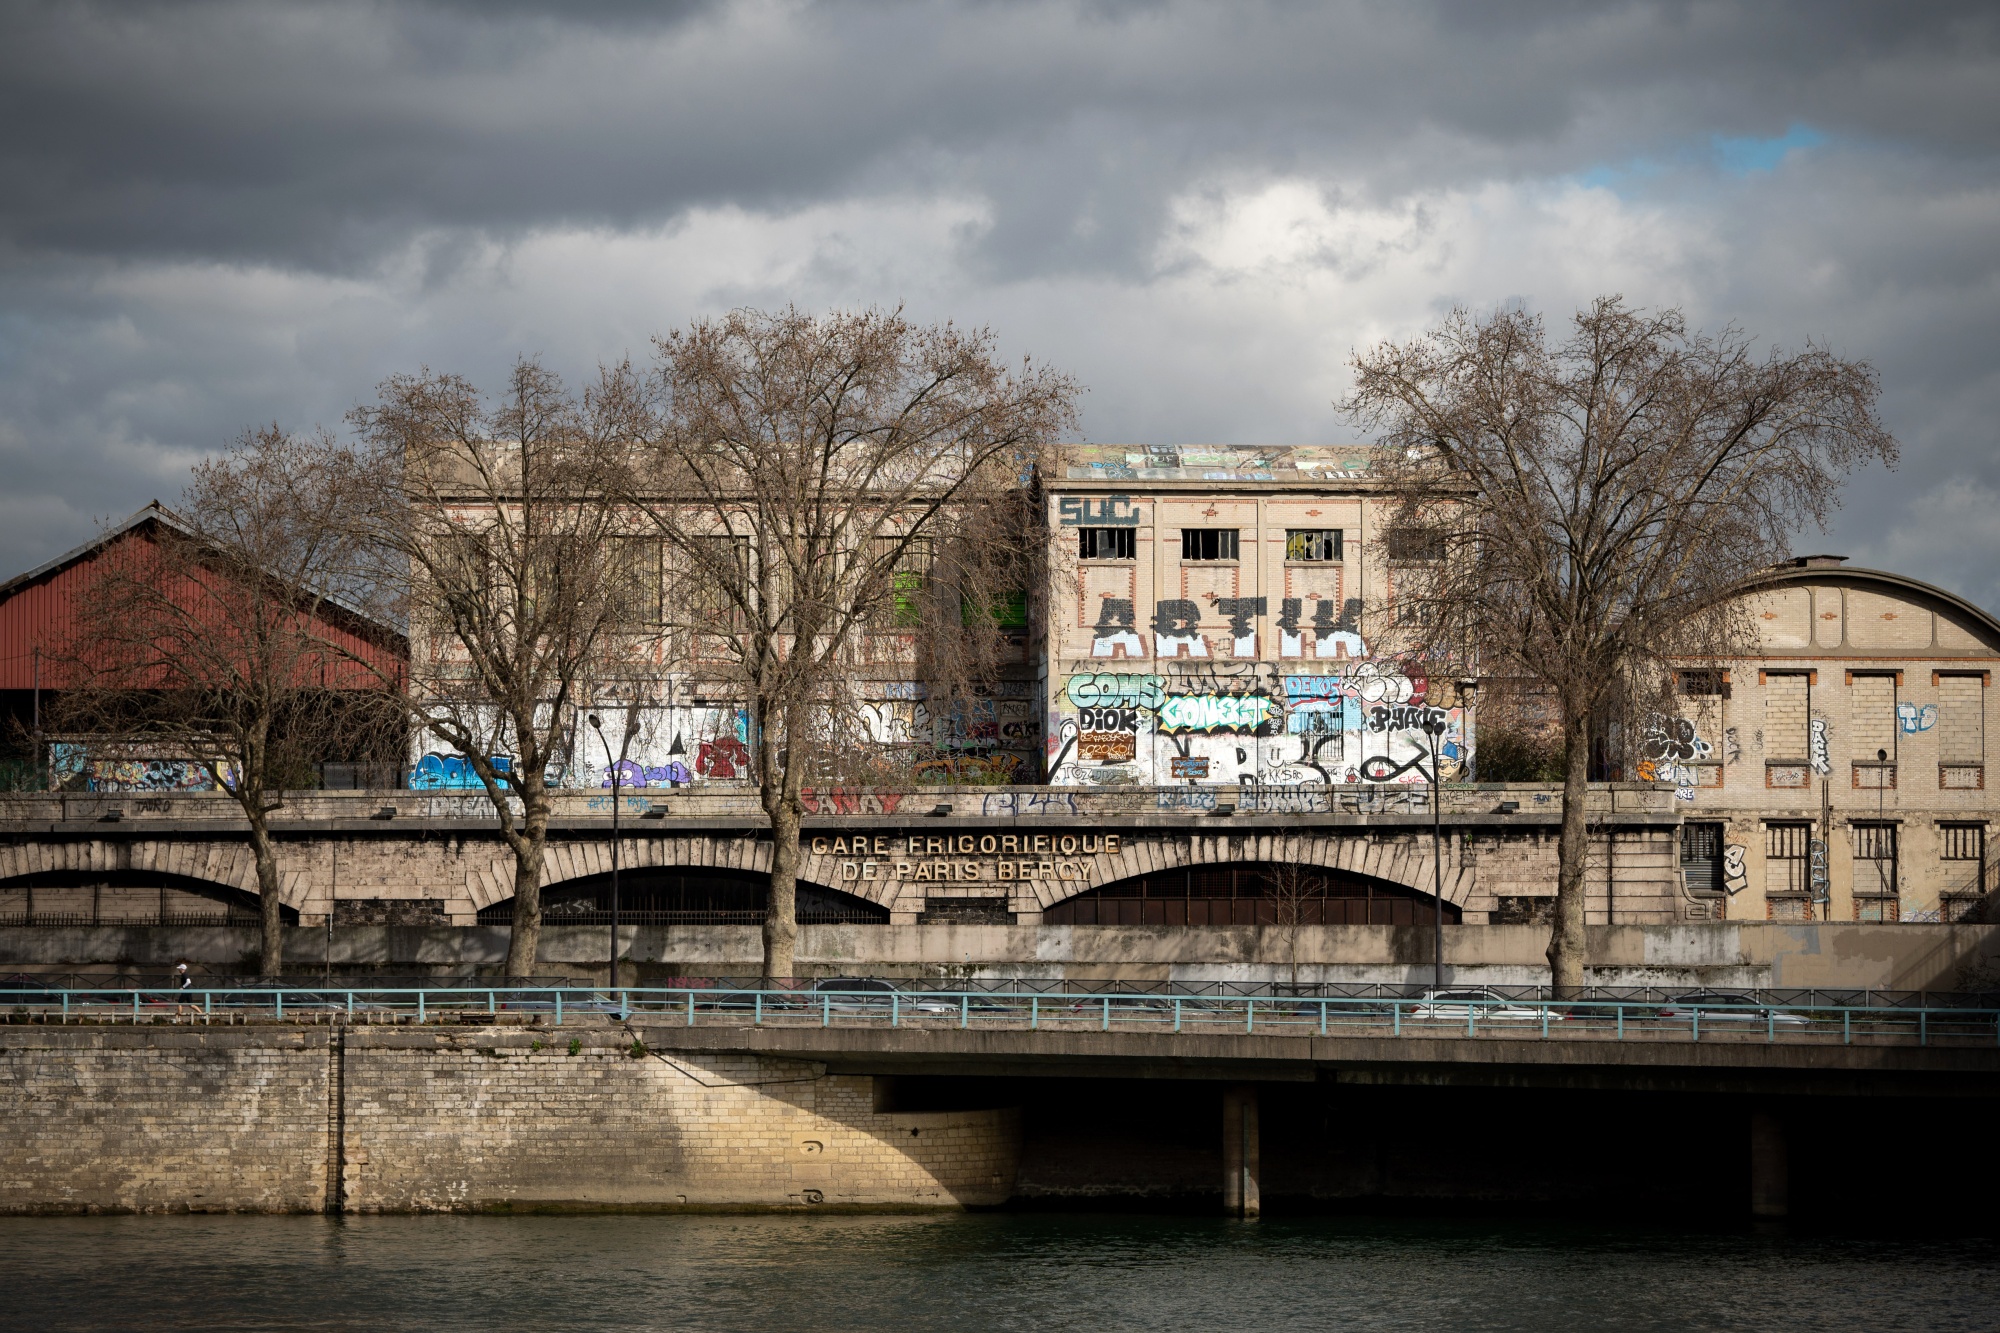 Plans for a sustainable garden footbridge above the Seine - Springwise